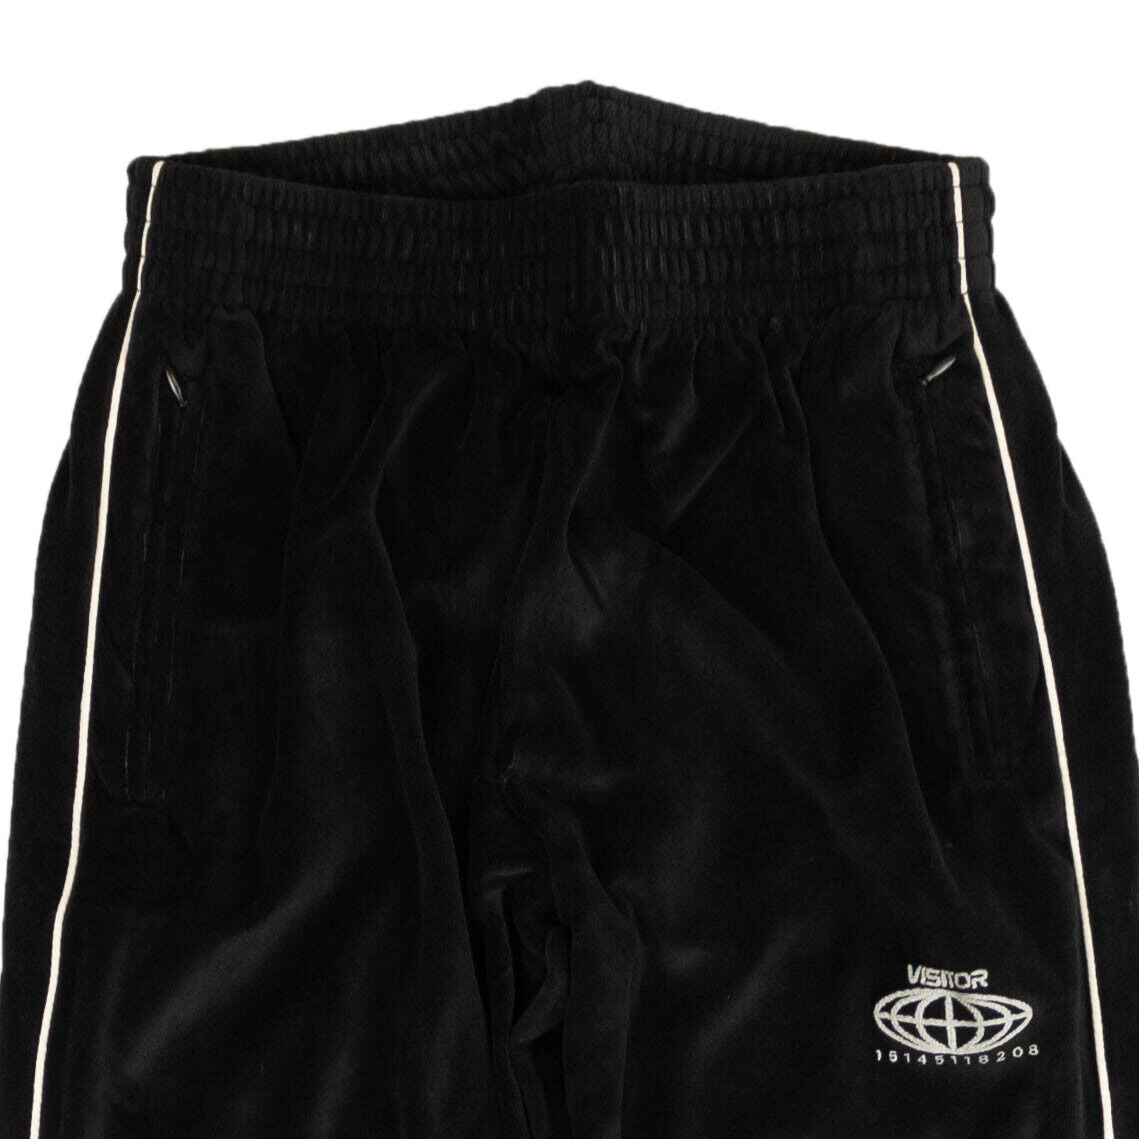 Visitor On Earth Velour Pants - Black